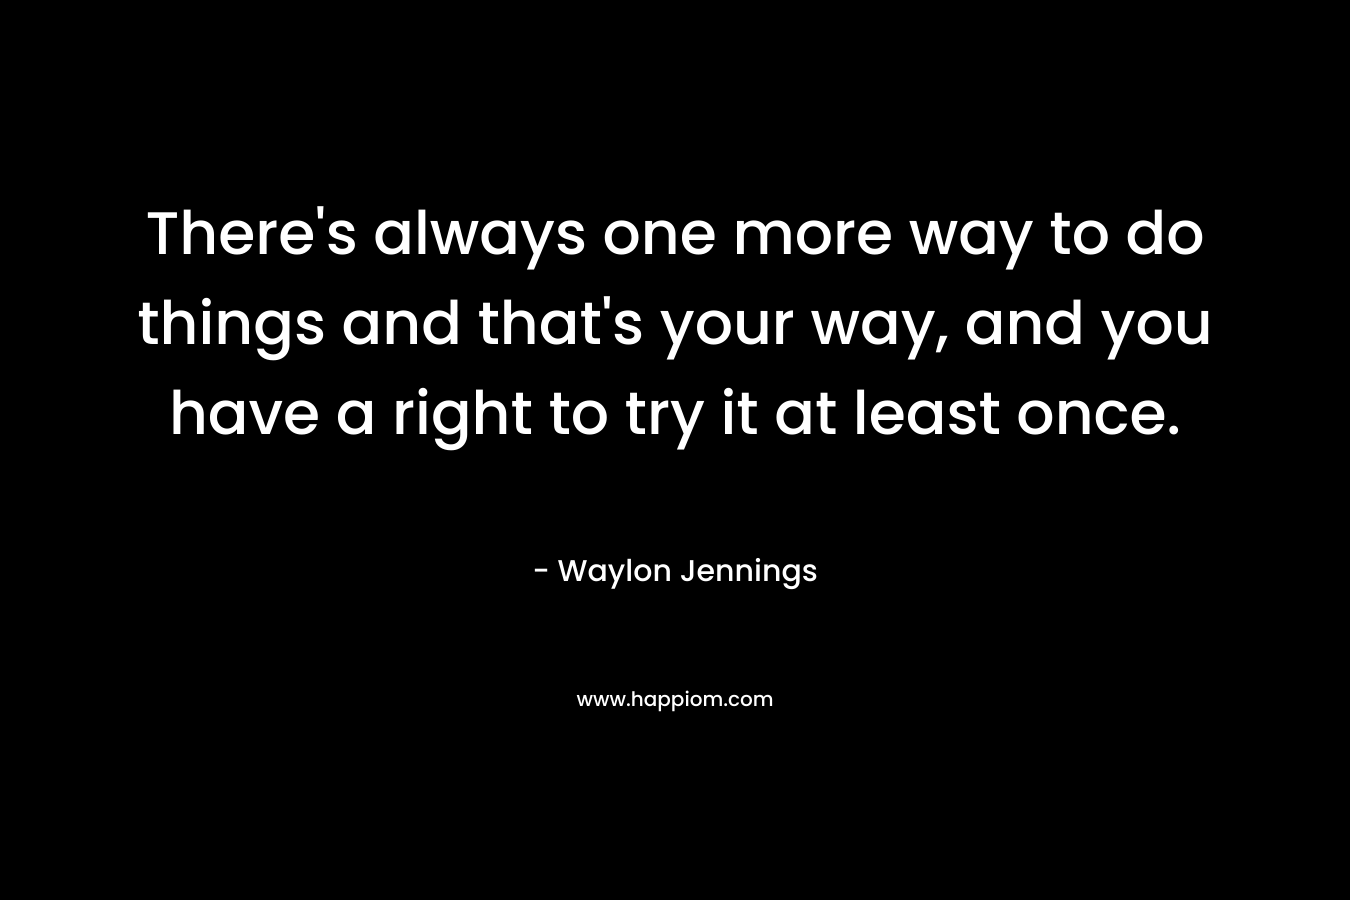 There’s always one more way to do things and that’s your way, and you have a right to try it at least once. – Waylon Jennings